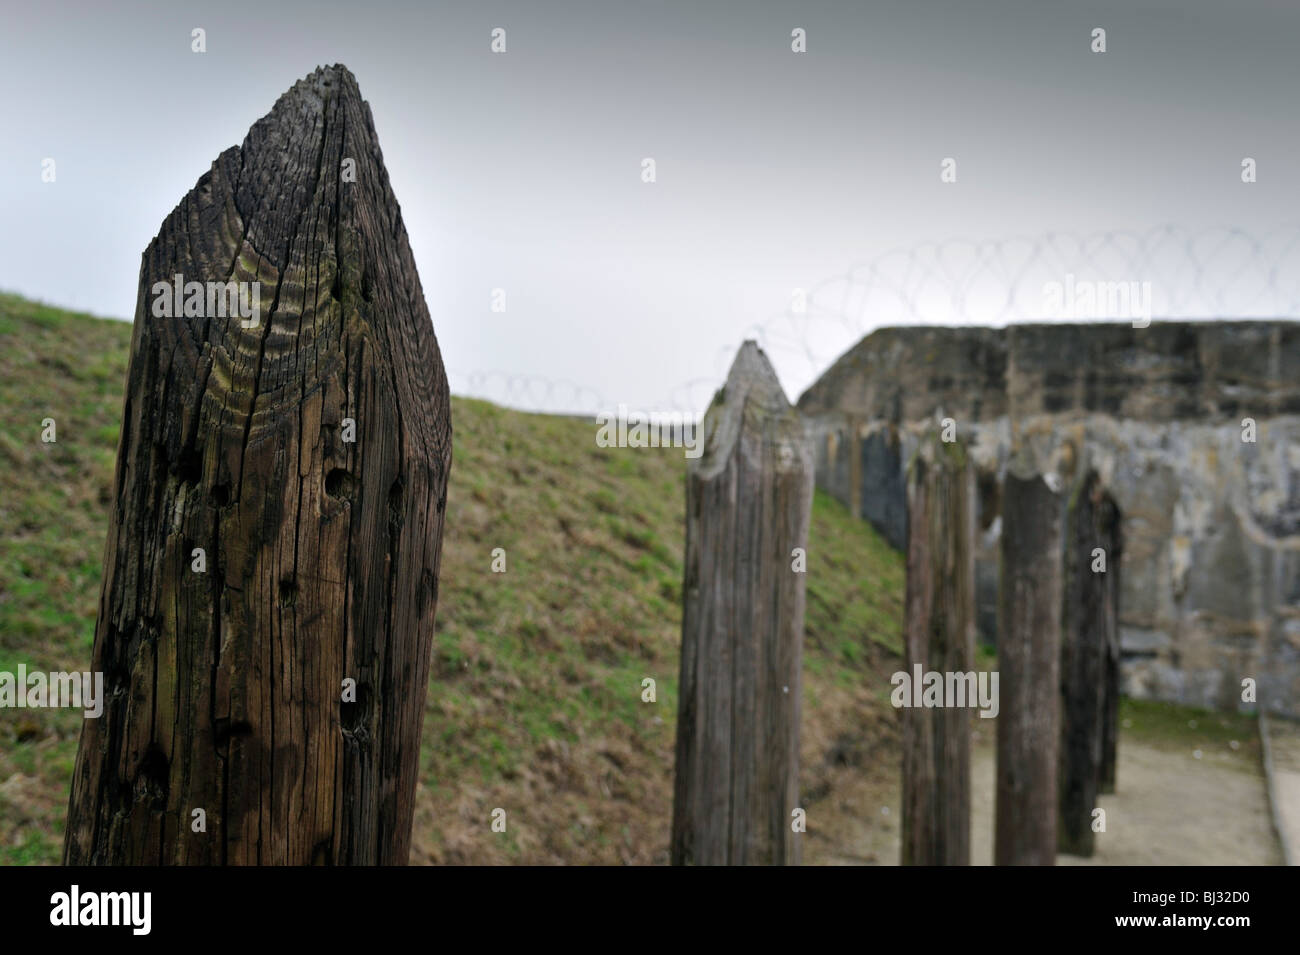 Wooden poles for execution of political prisoners at Fort Breendonk, Second World War Two concentration camp in Belgium Stock Photo